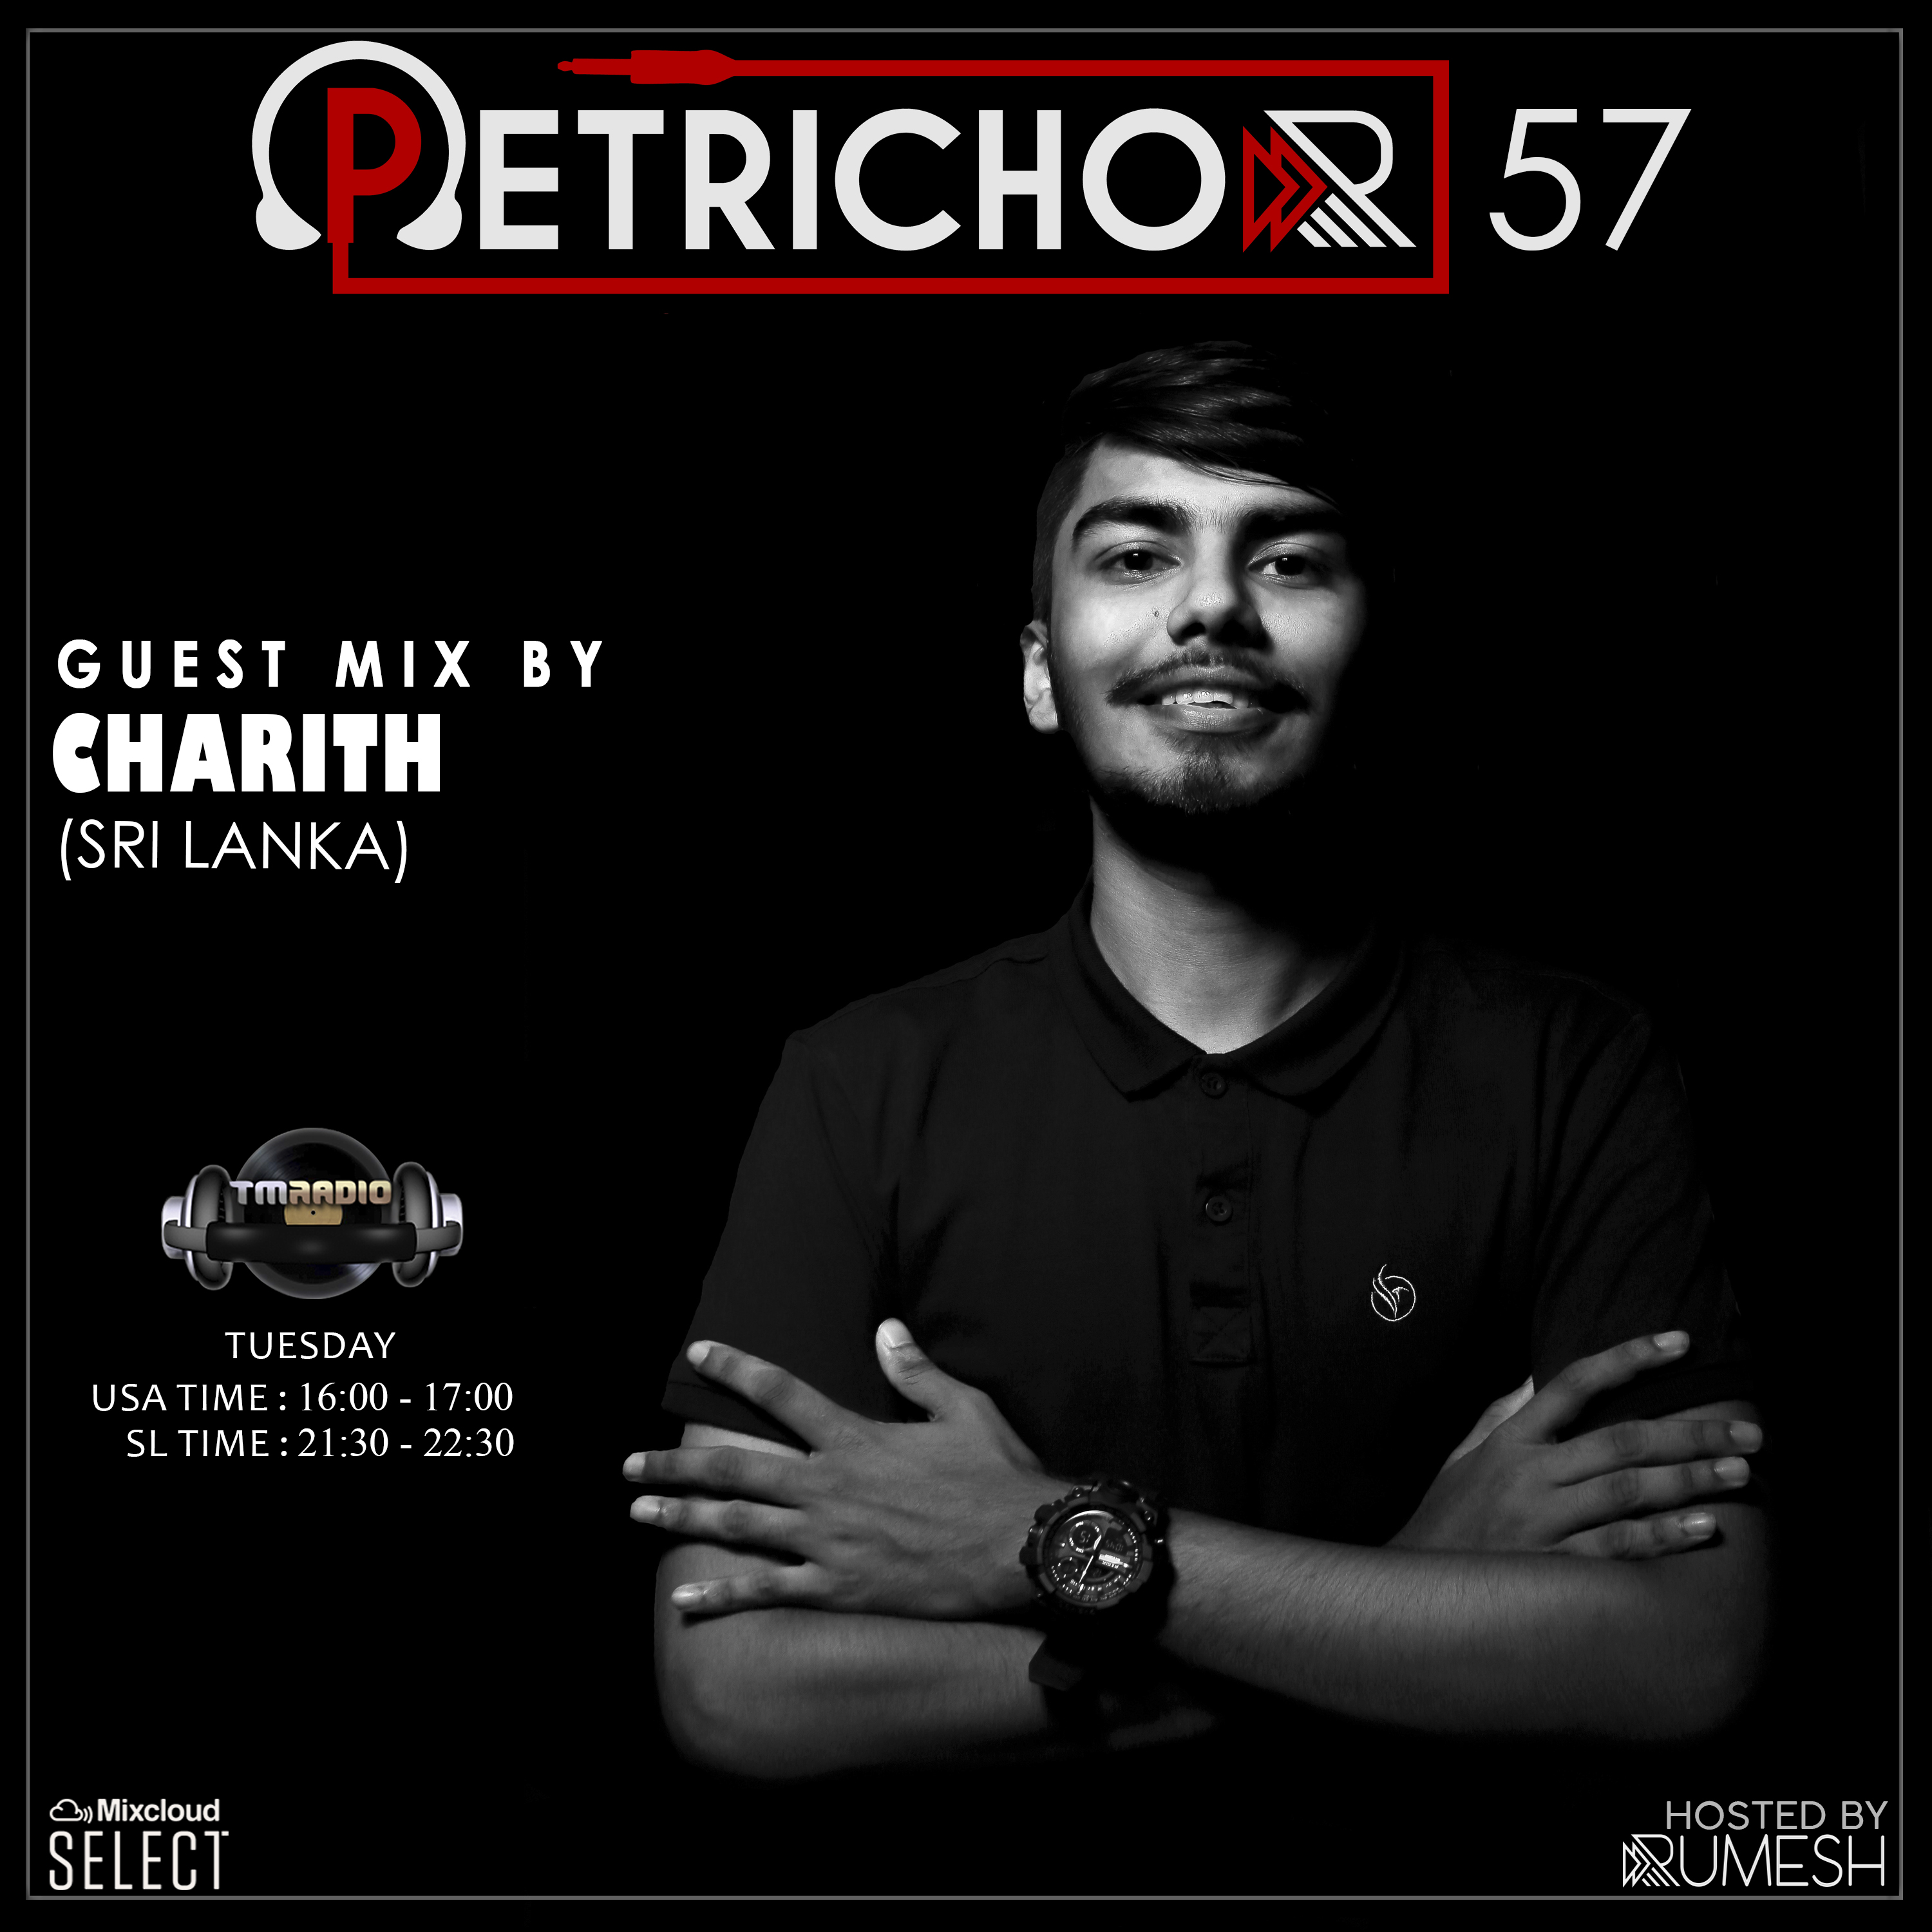 Petrichor :: Petrichor 57 guest mix by Charith (Sri Lanka) (aired on December 10th, 2019) banner logo